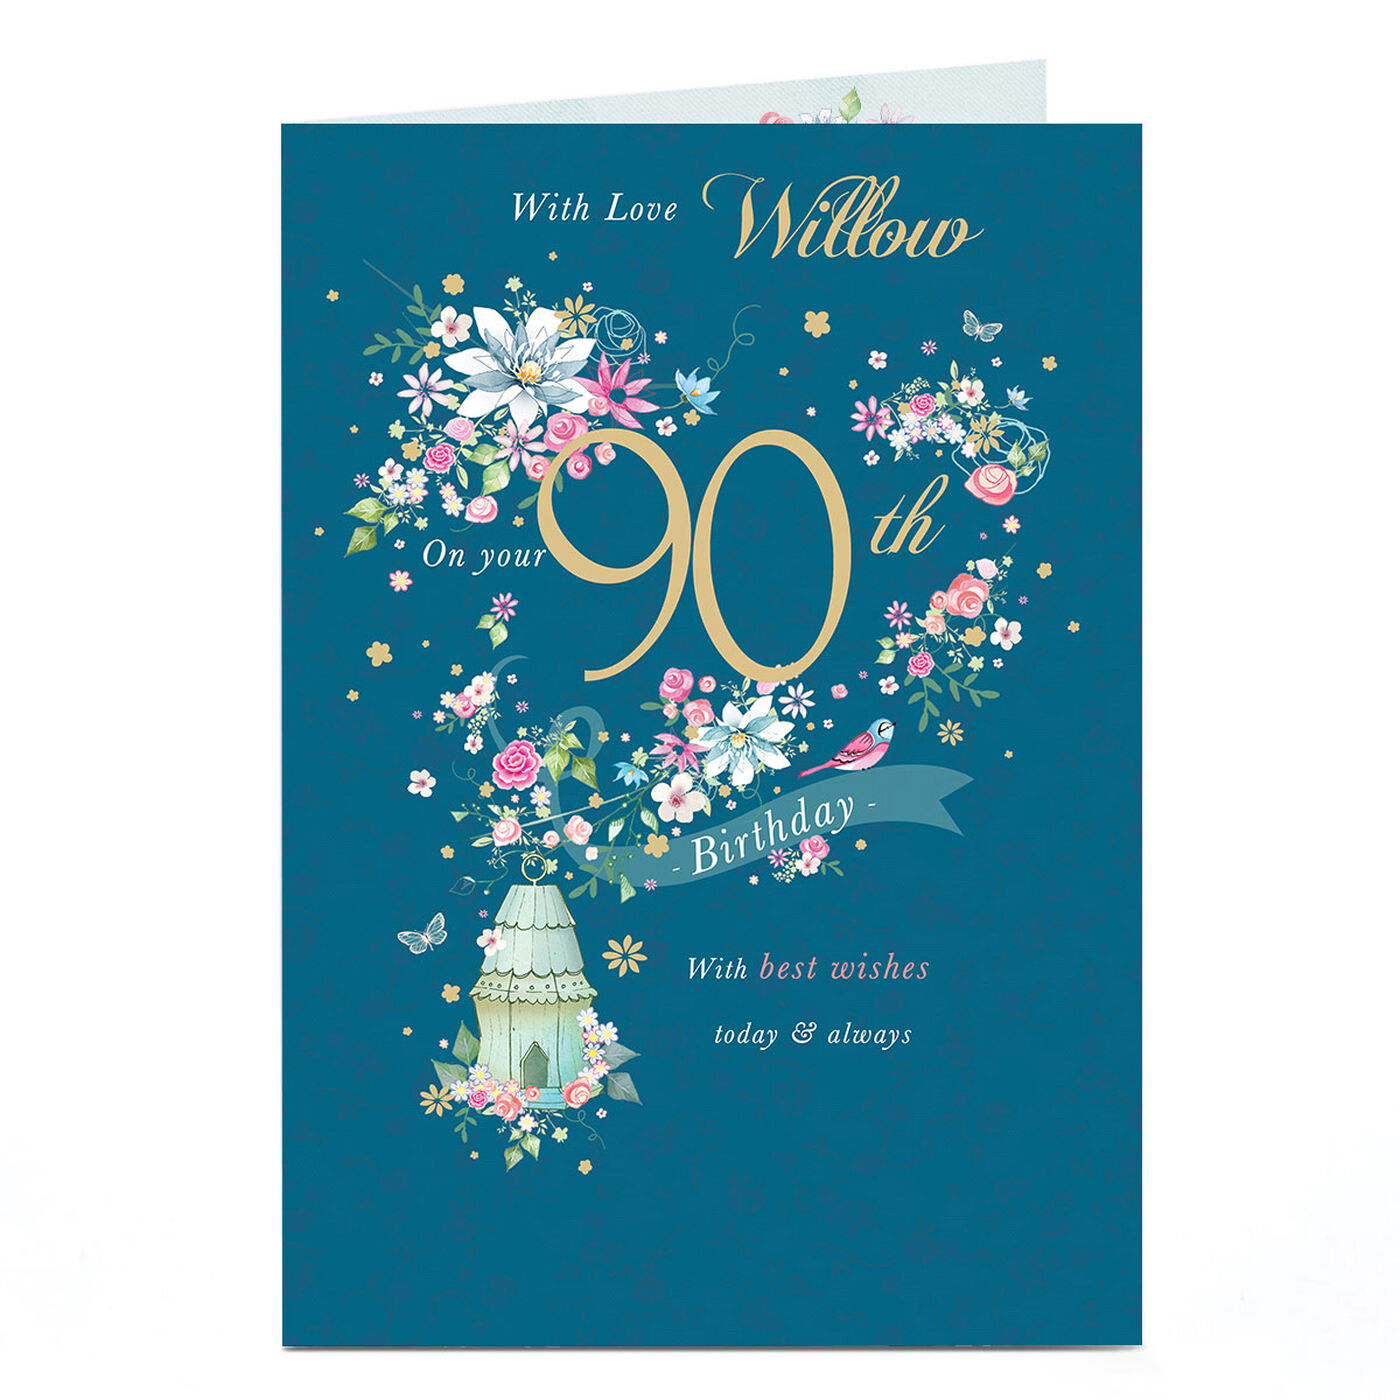 Buy Personalised Birthday Card Flowers And Birdhouse Editable Age For